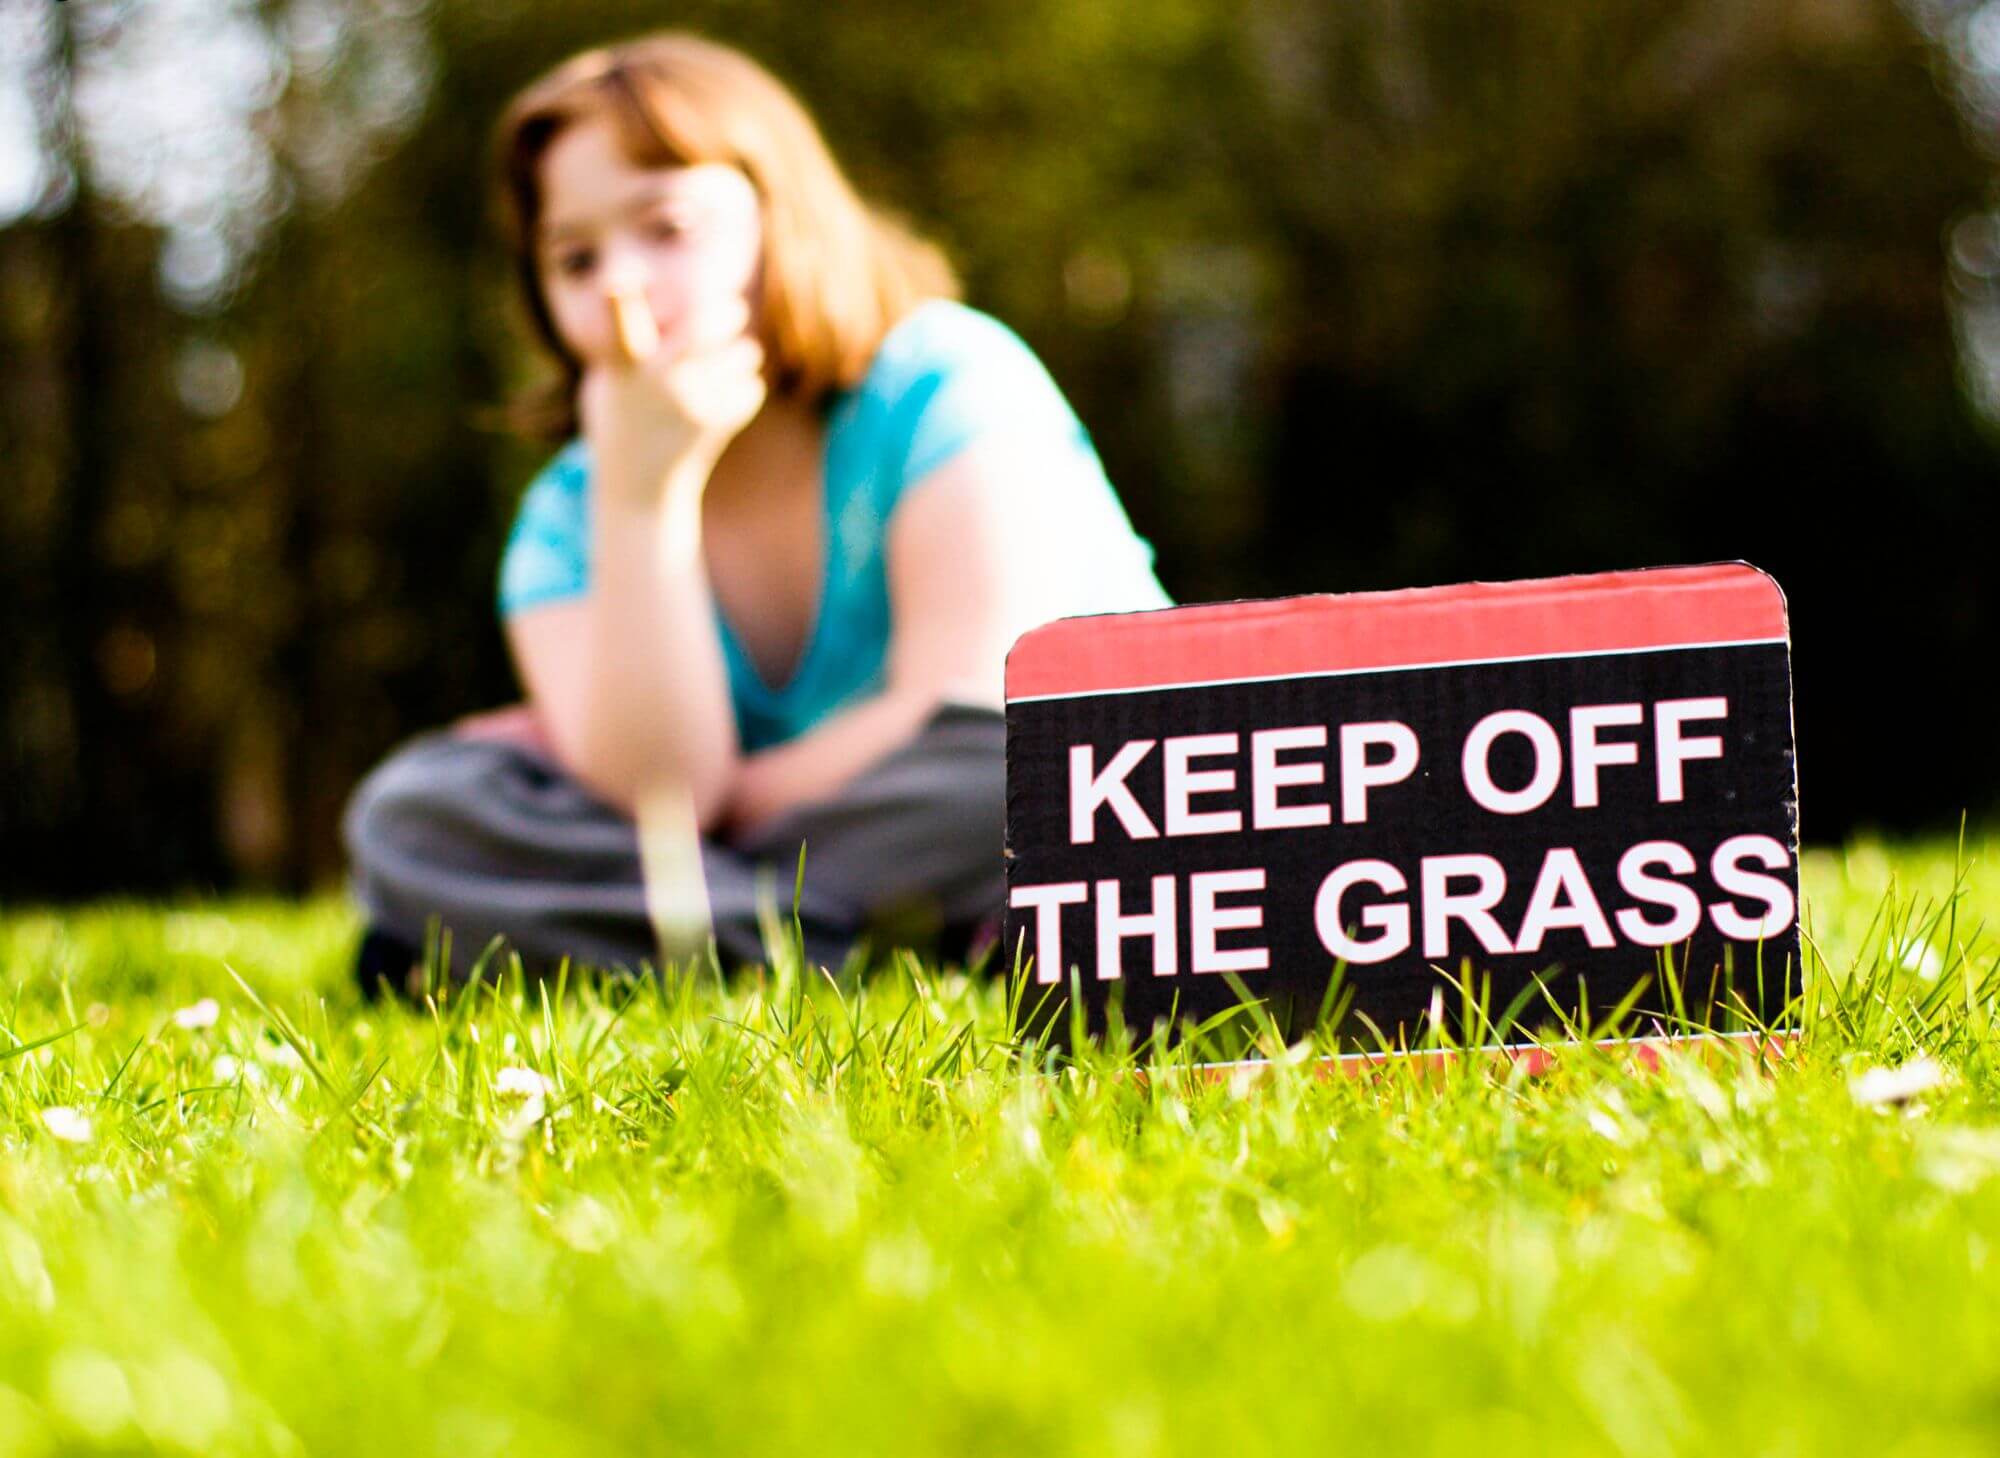 Developers, HOAs, municipalities and the management of all manner of complexes, schools and campuses are learning that there are some things you just can’t fight. Put up as many ‘Keep off the grass’ signs as you like, people will take the shortest (or most convenient) path to get to where they’re going. So, the smart ones are giving in.